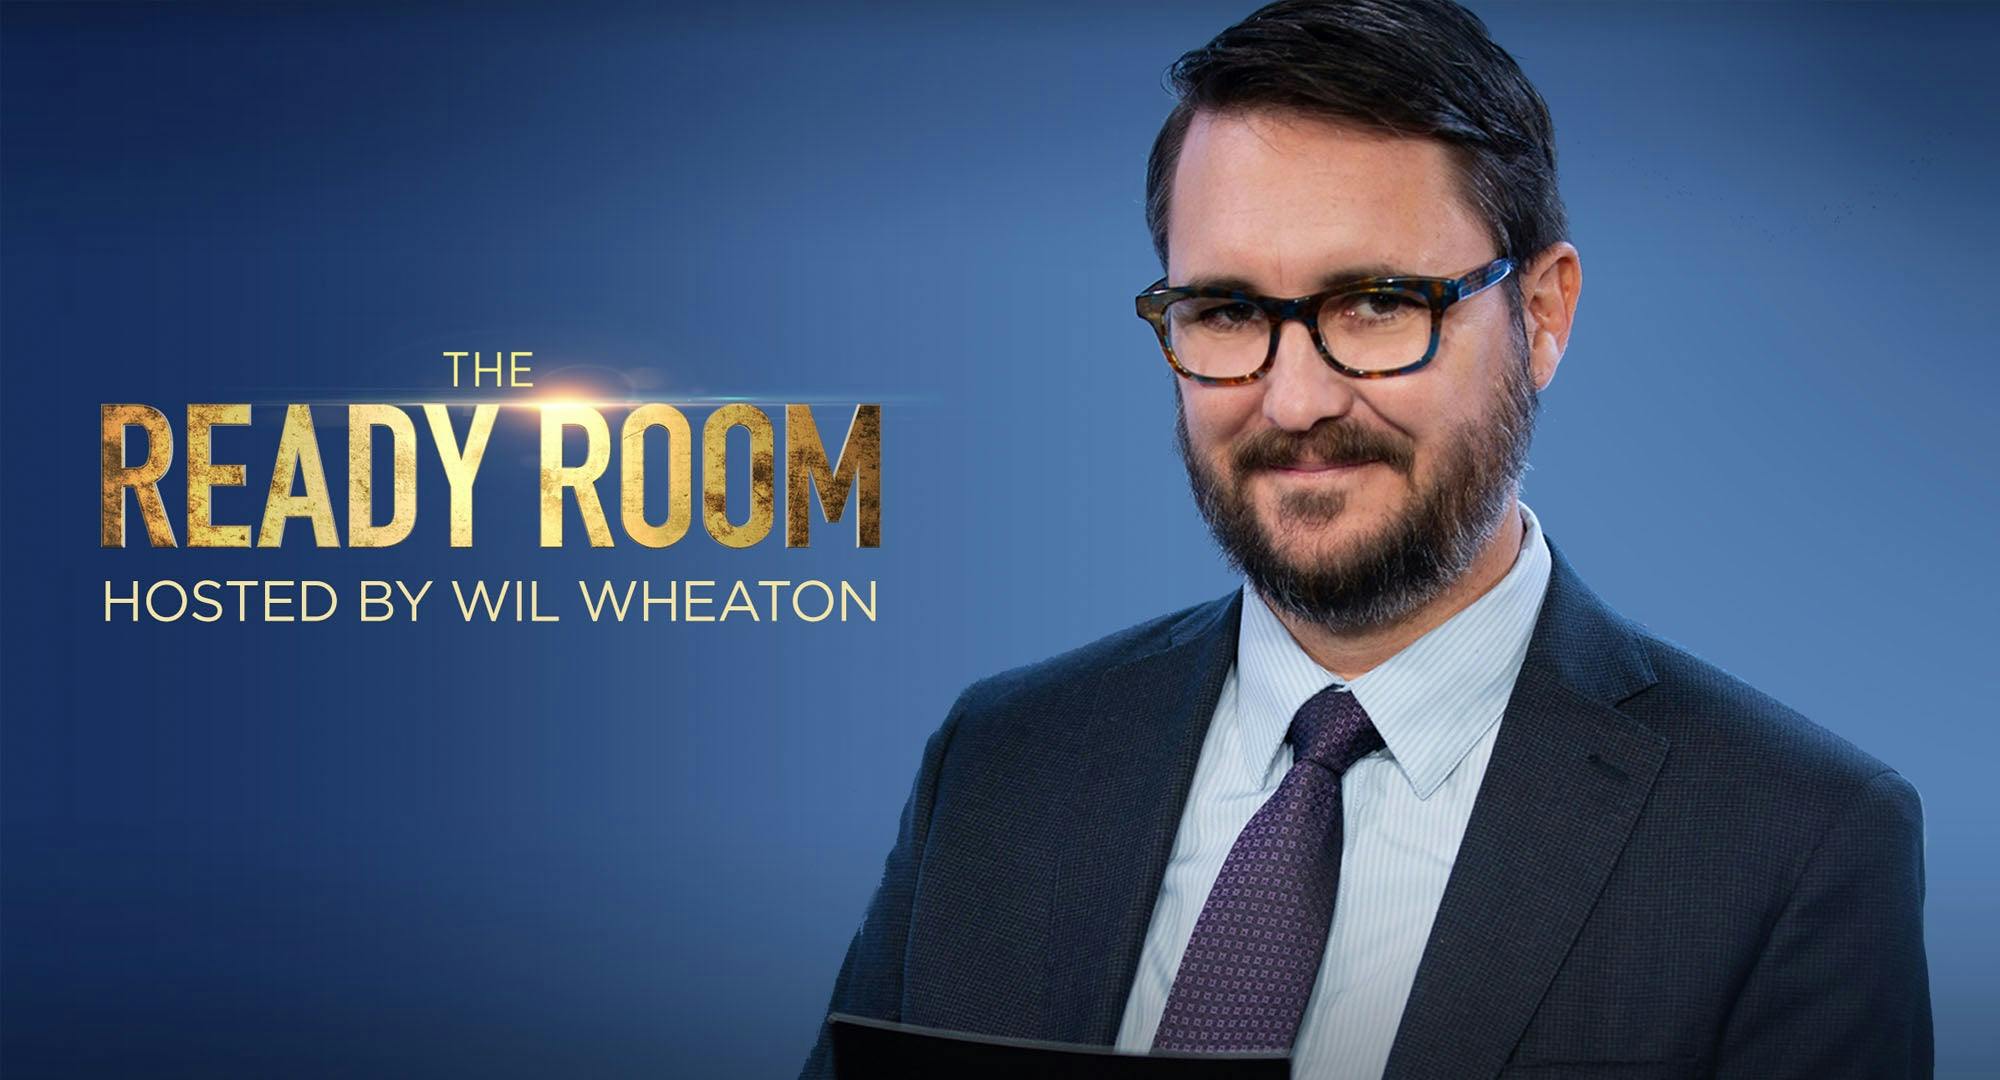 The Ready Room Hosted by Wil Wheaton